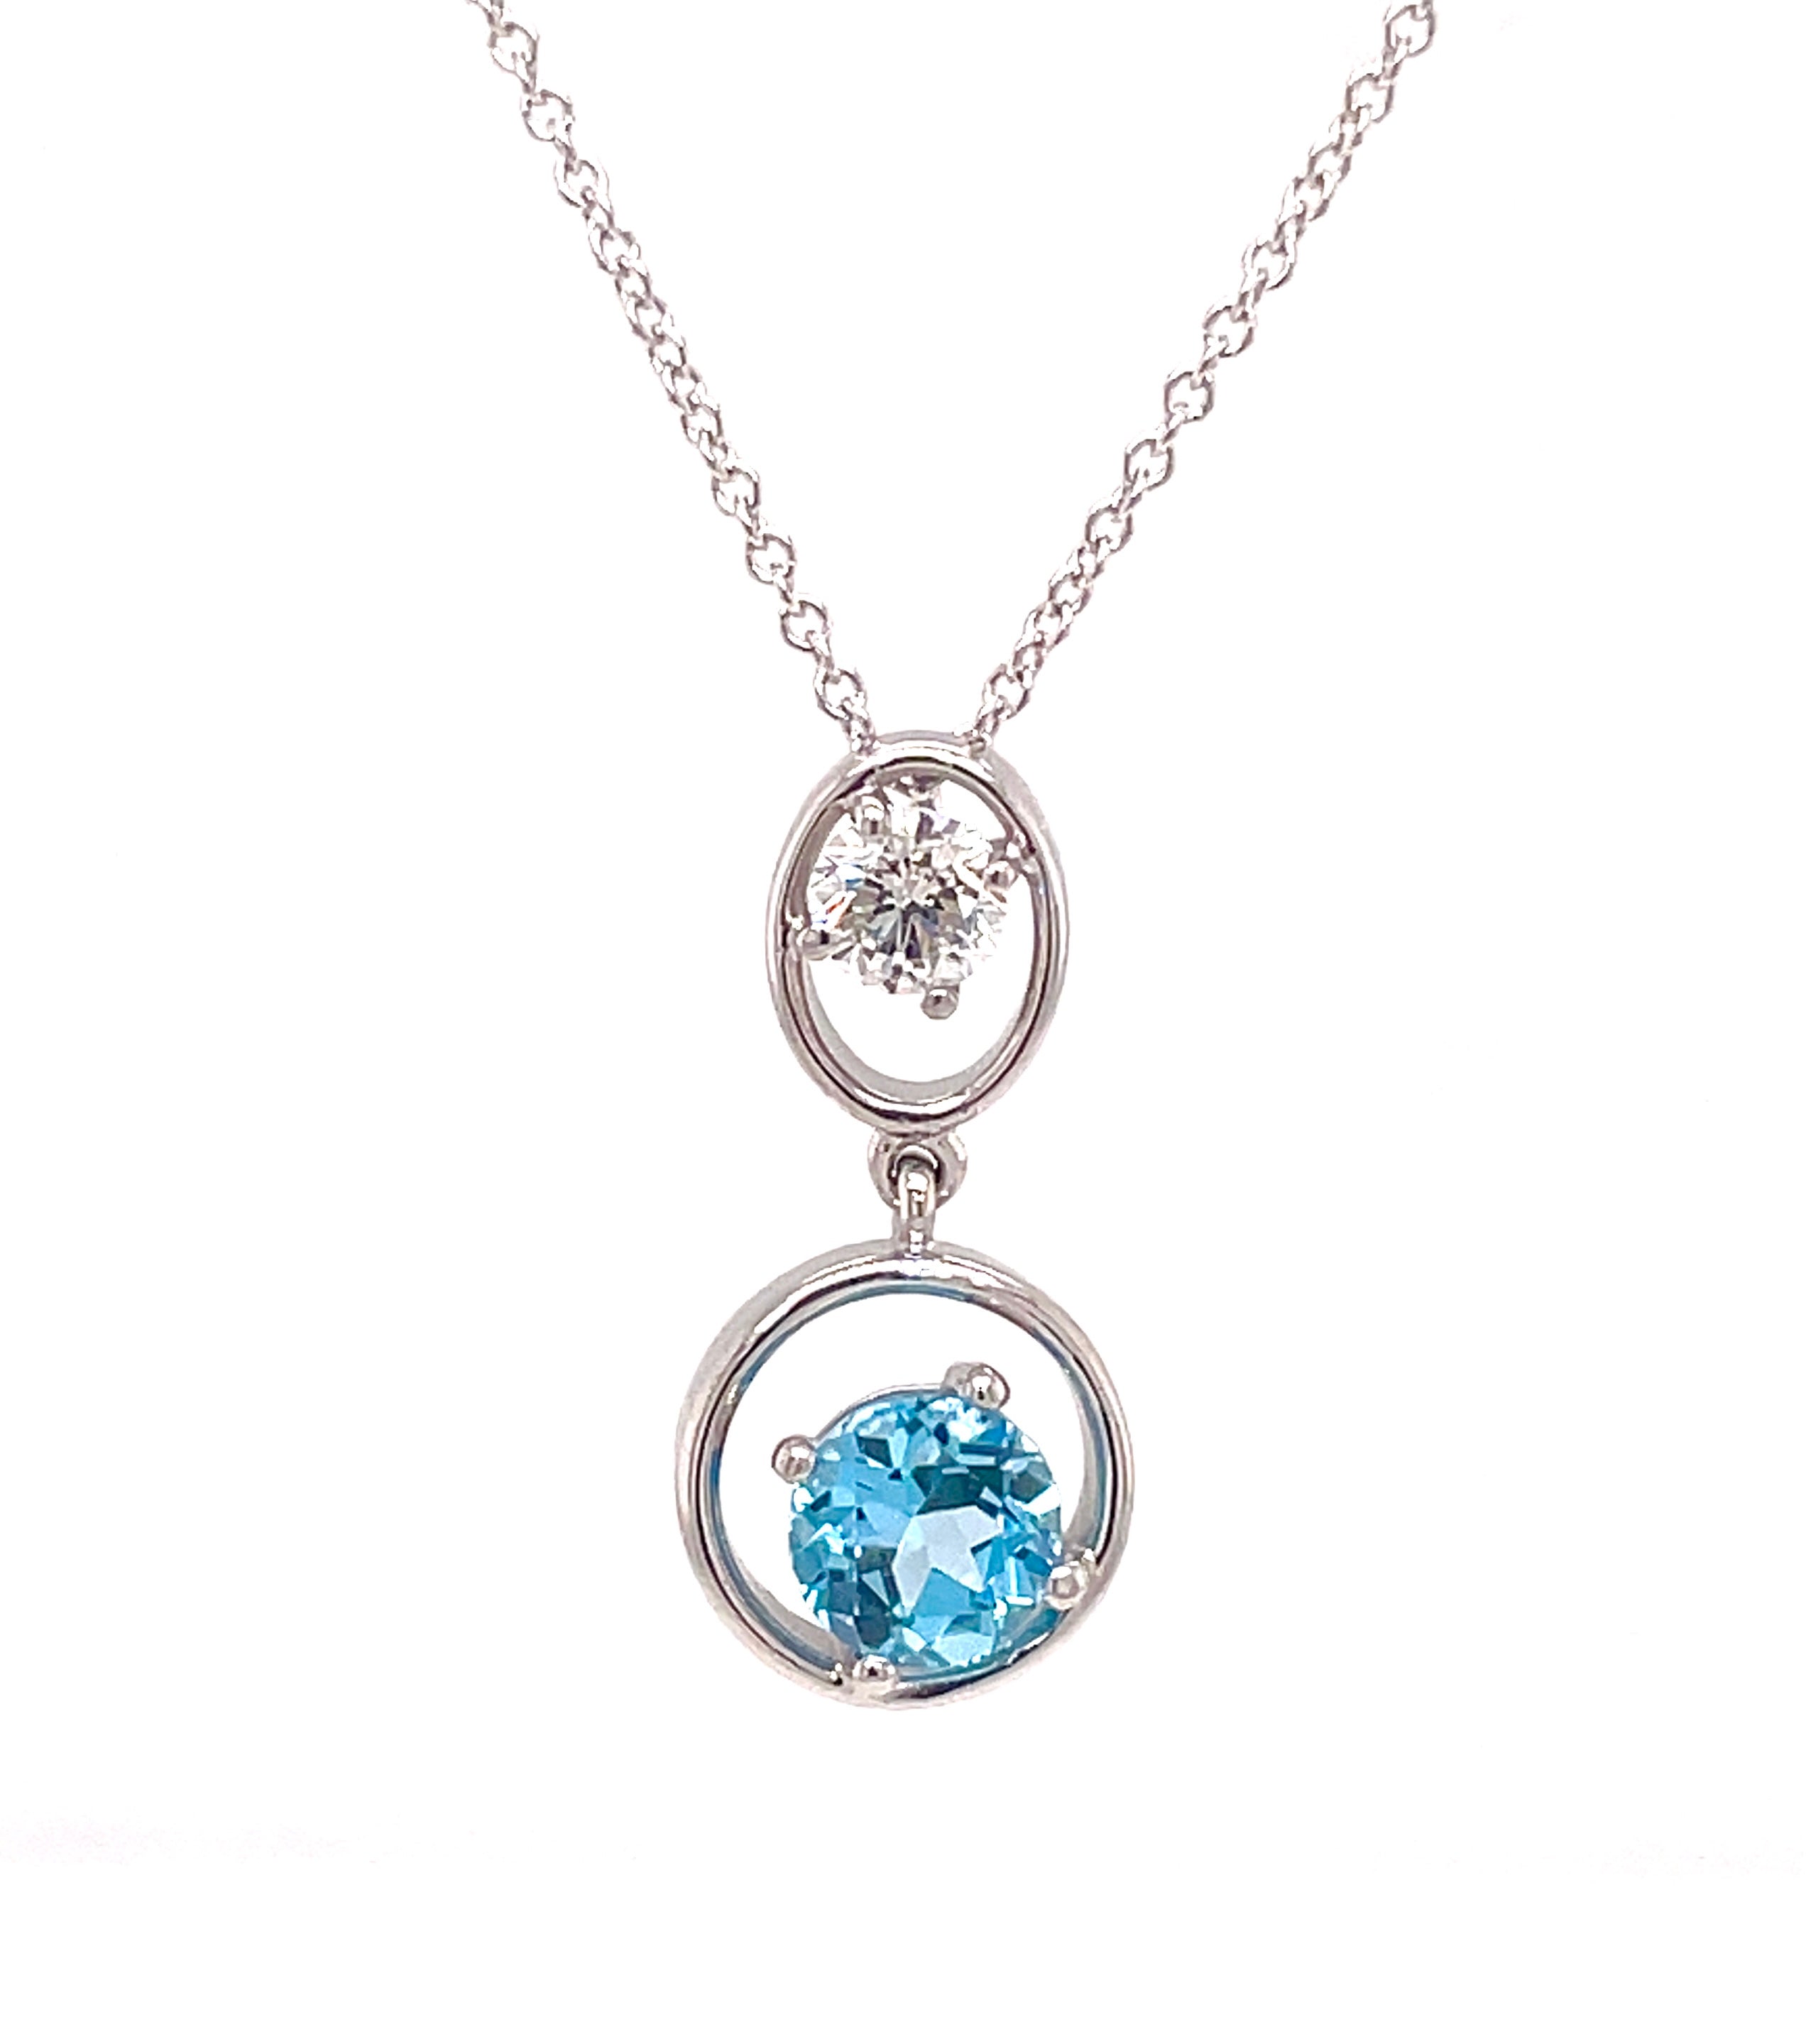 This necklace features a circle composed of one oval blue topaz with a total weight of 1.21 ct, set with a single round diamond at 0.33 cts, all crafted in 14k white gold. The necklace is a 14k white gold chain link with a secure lobster clasp with a length of 18".